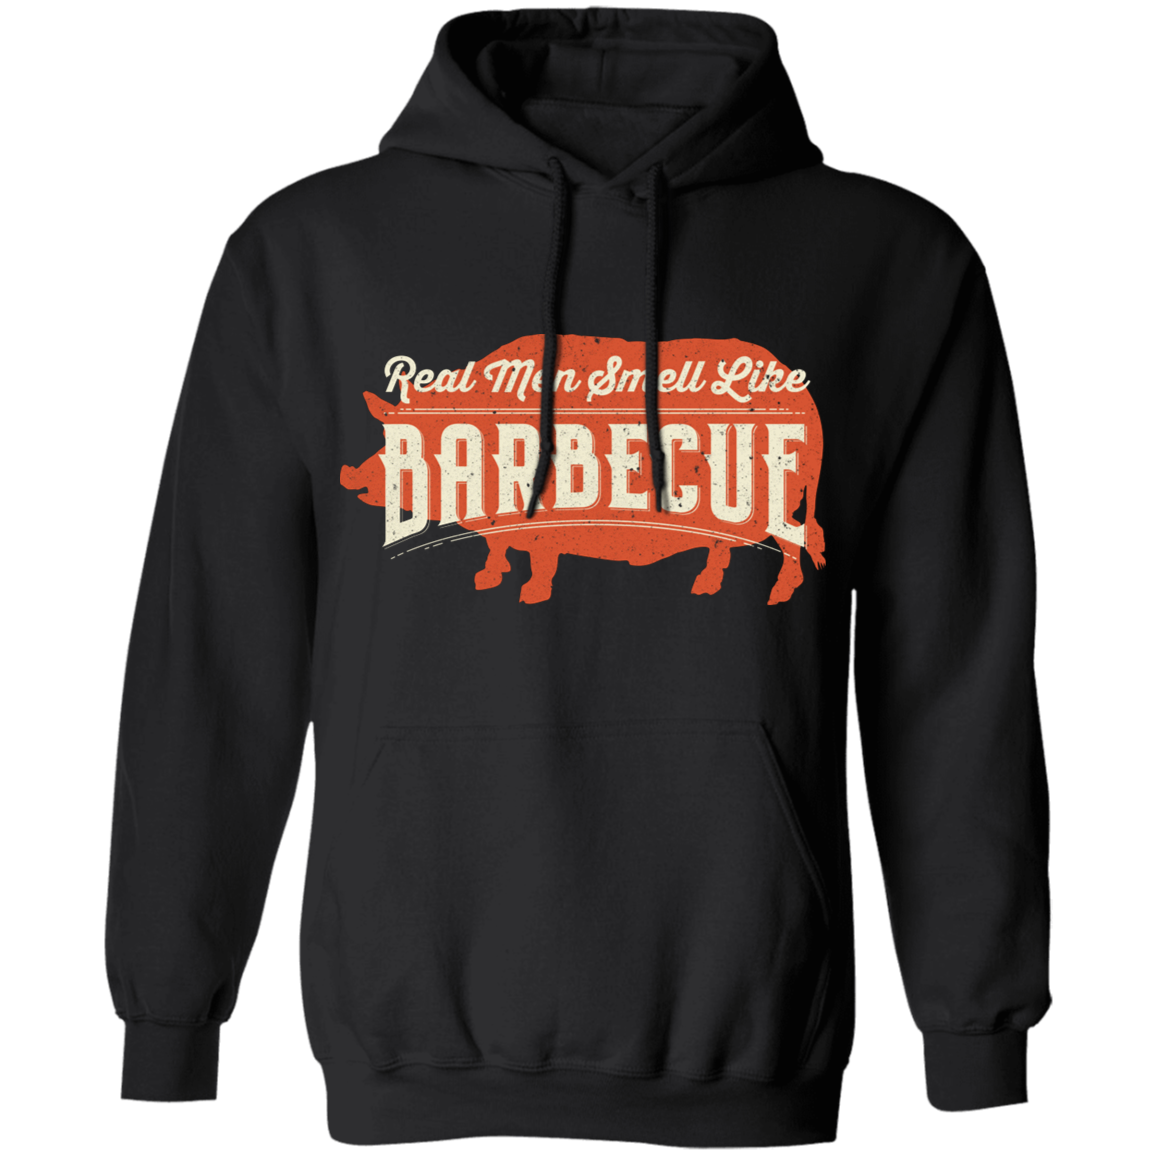 Real Men Smell Like B-B-Q Pullover Hoodie